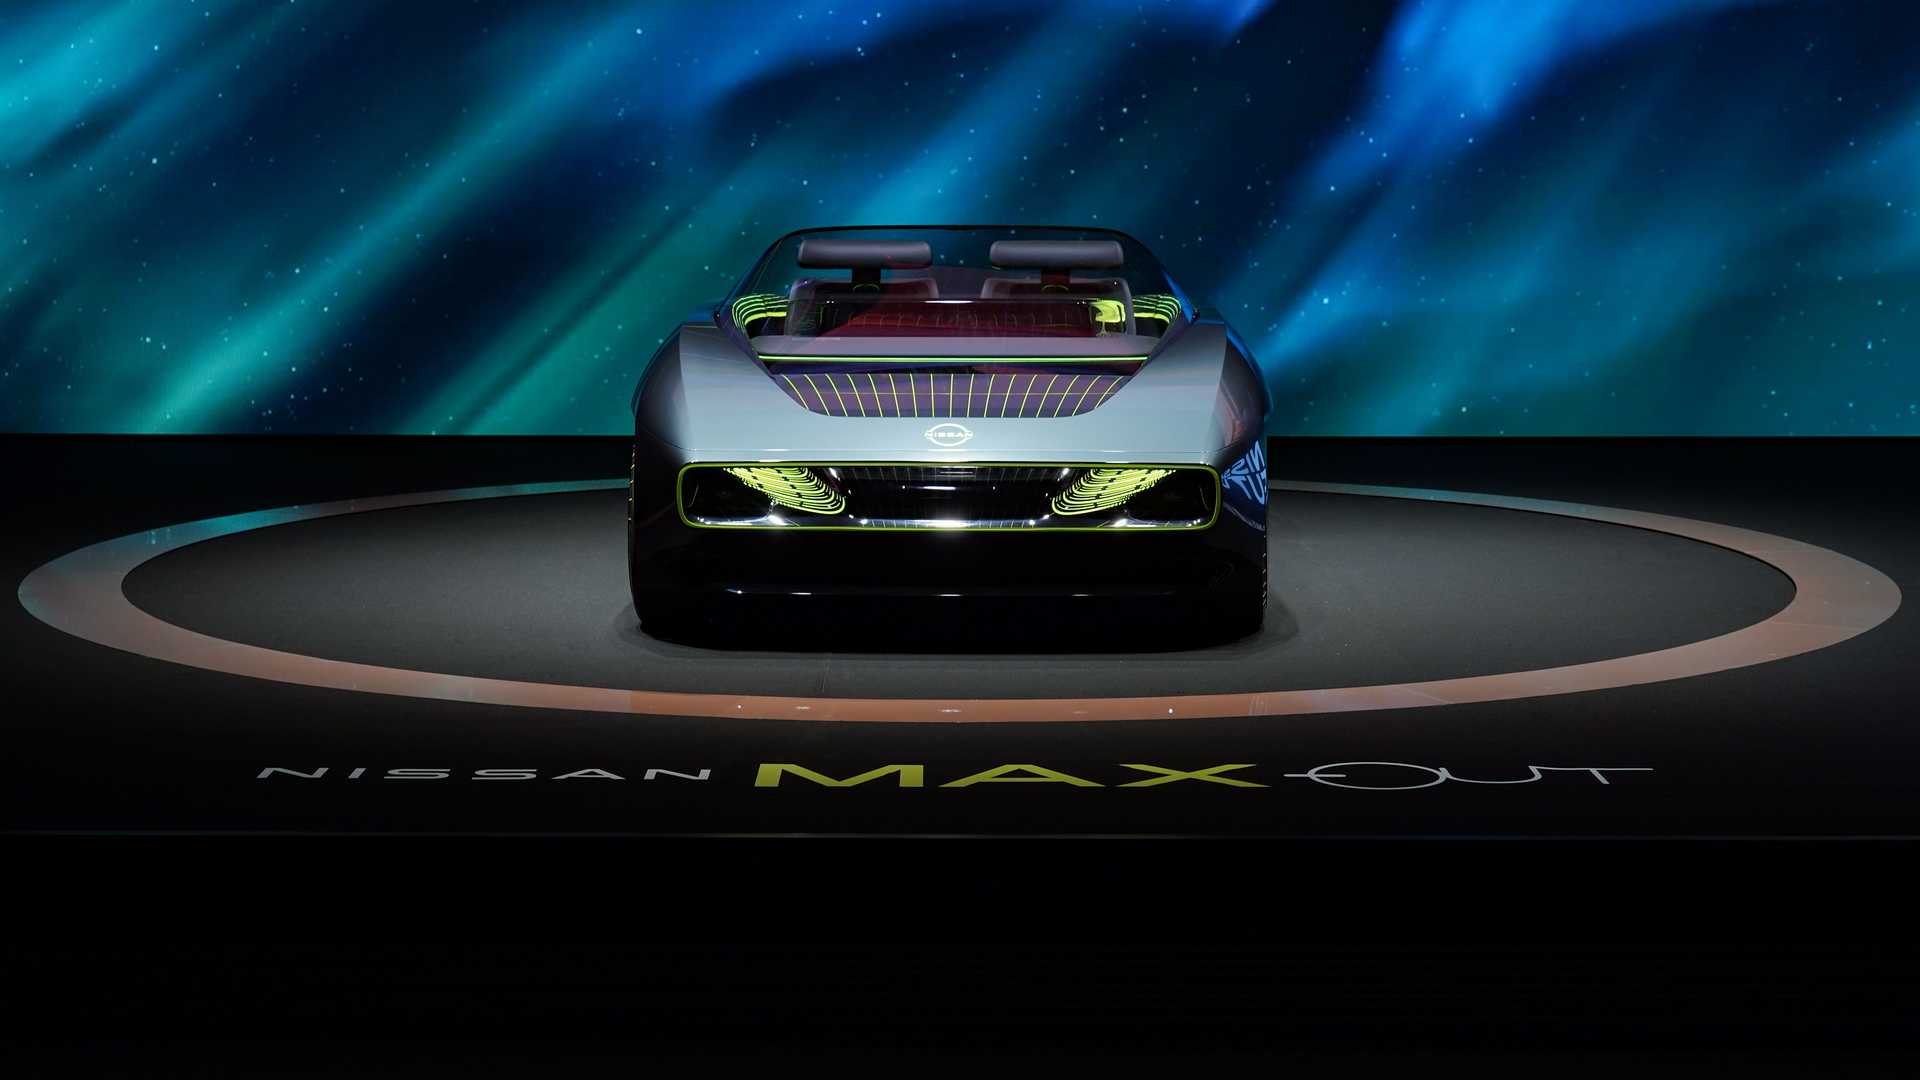 nissan-max-out-convertible-concept-8